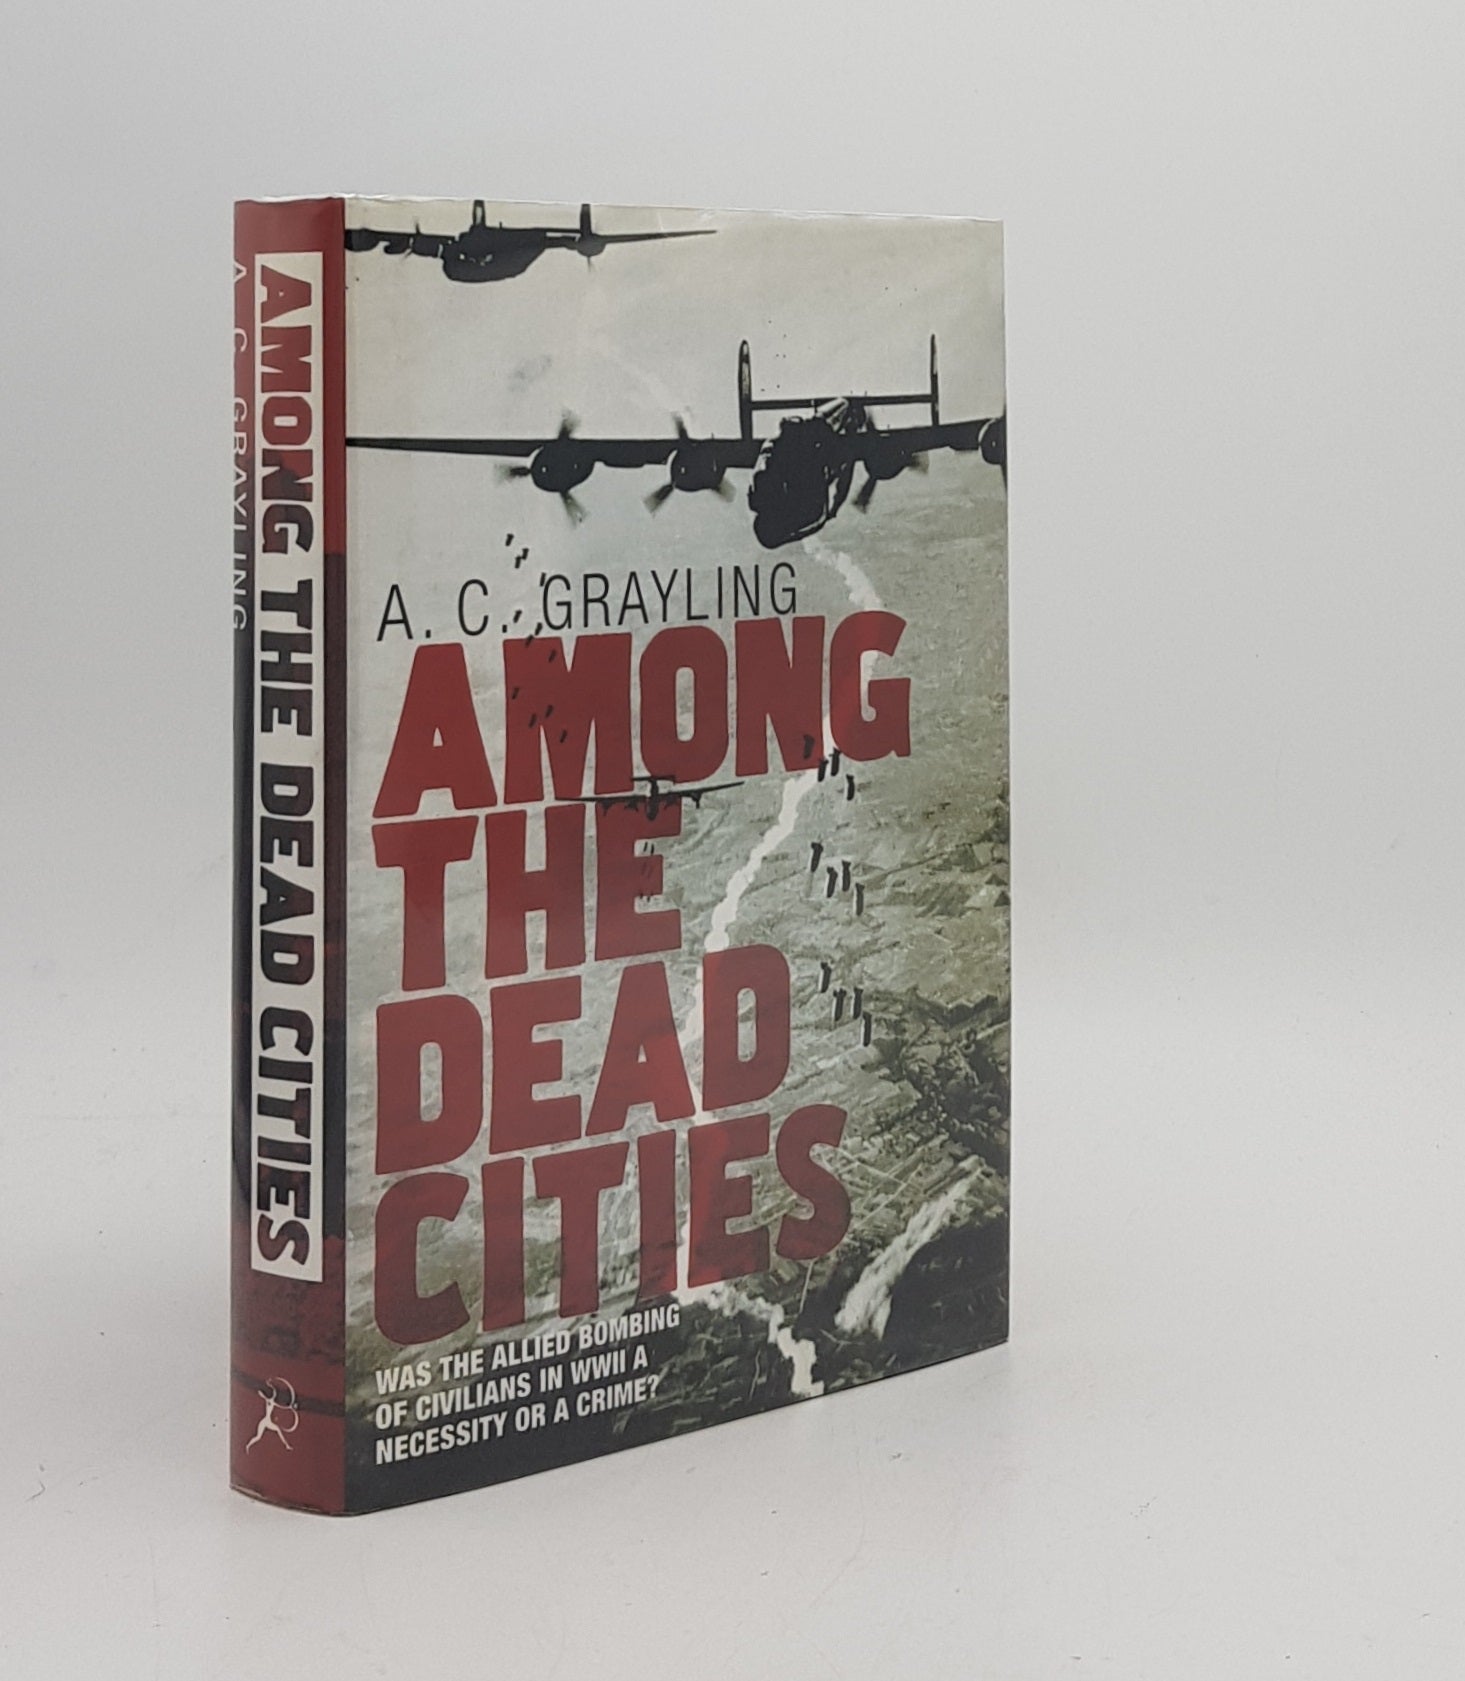 GRAYLING A.C. - Among the Dead Cities Was the Allied Bombing of Civilians in Wwii a Necessity or a Crime